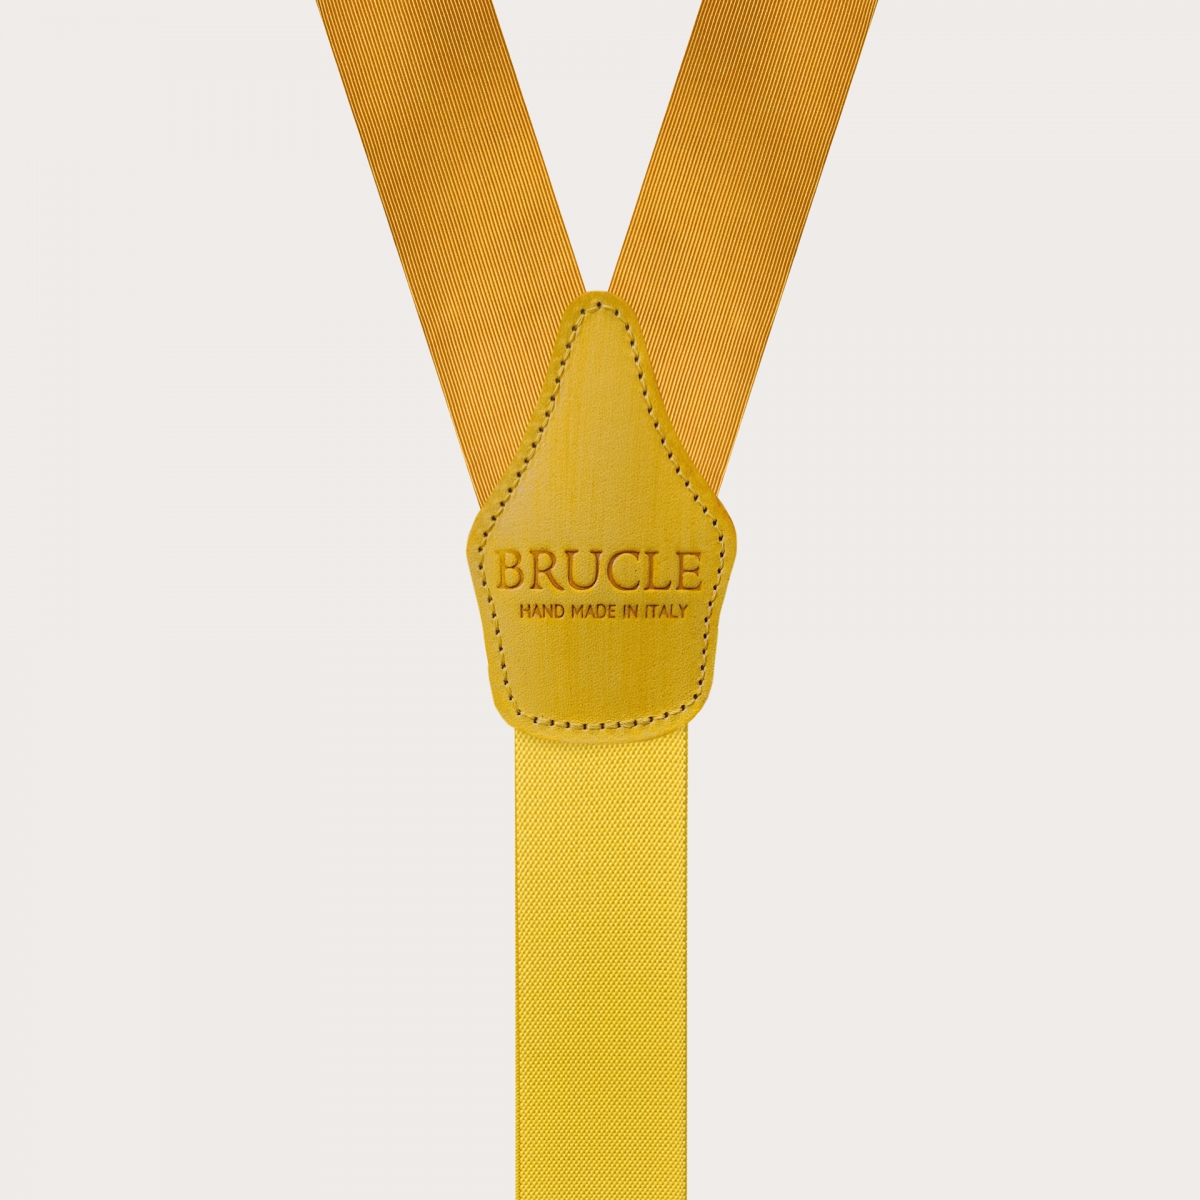 BRUCLE Refined suspenders in yellow jacquard silk with hand-colored leather parts